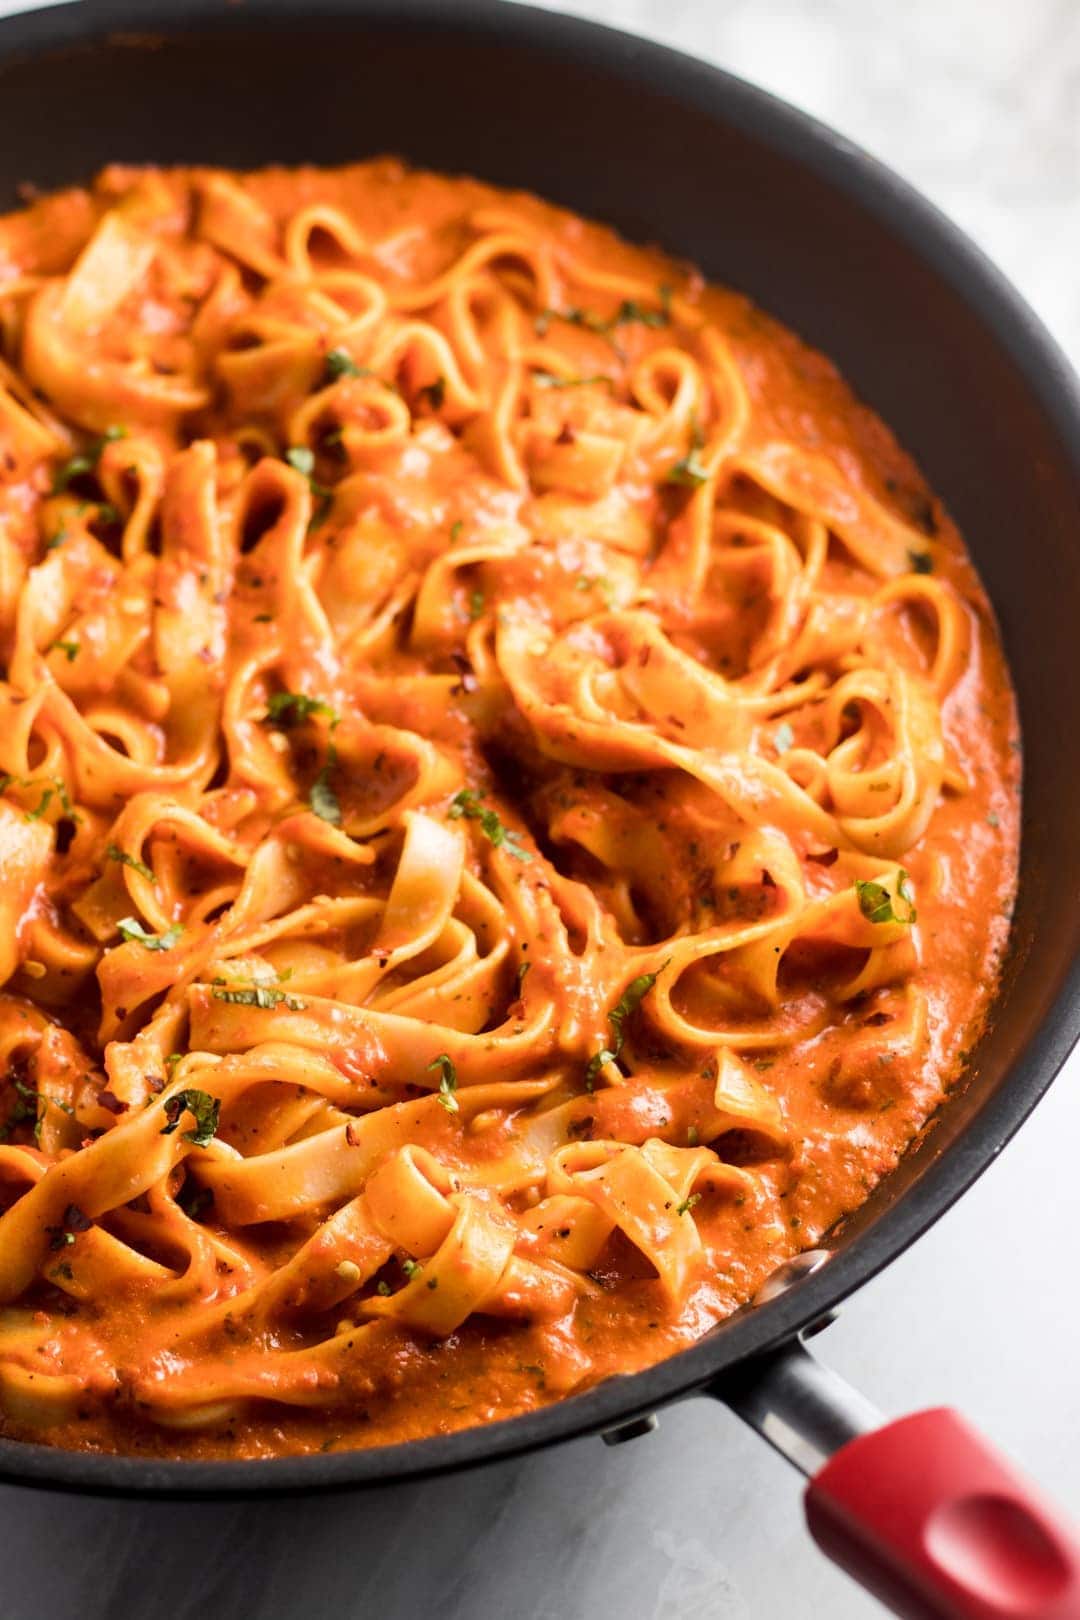 image of a close up of a pan filled with fettuccine covered in red pepper sauce